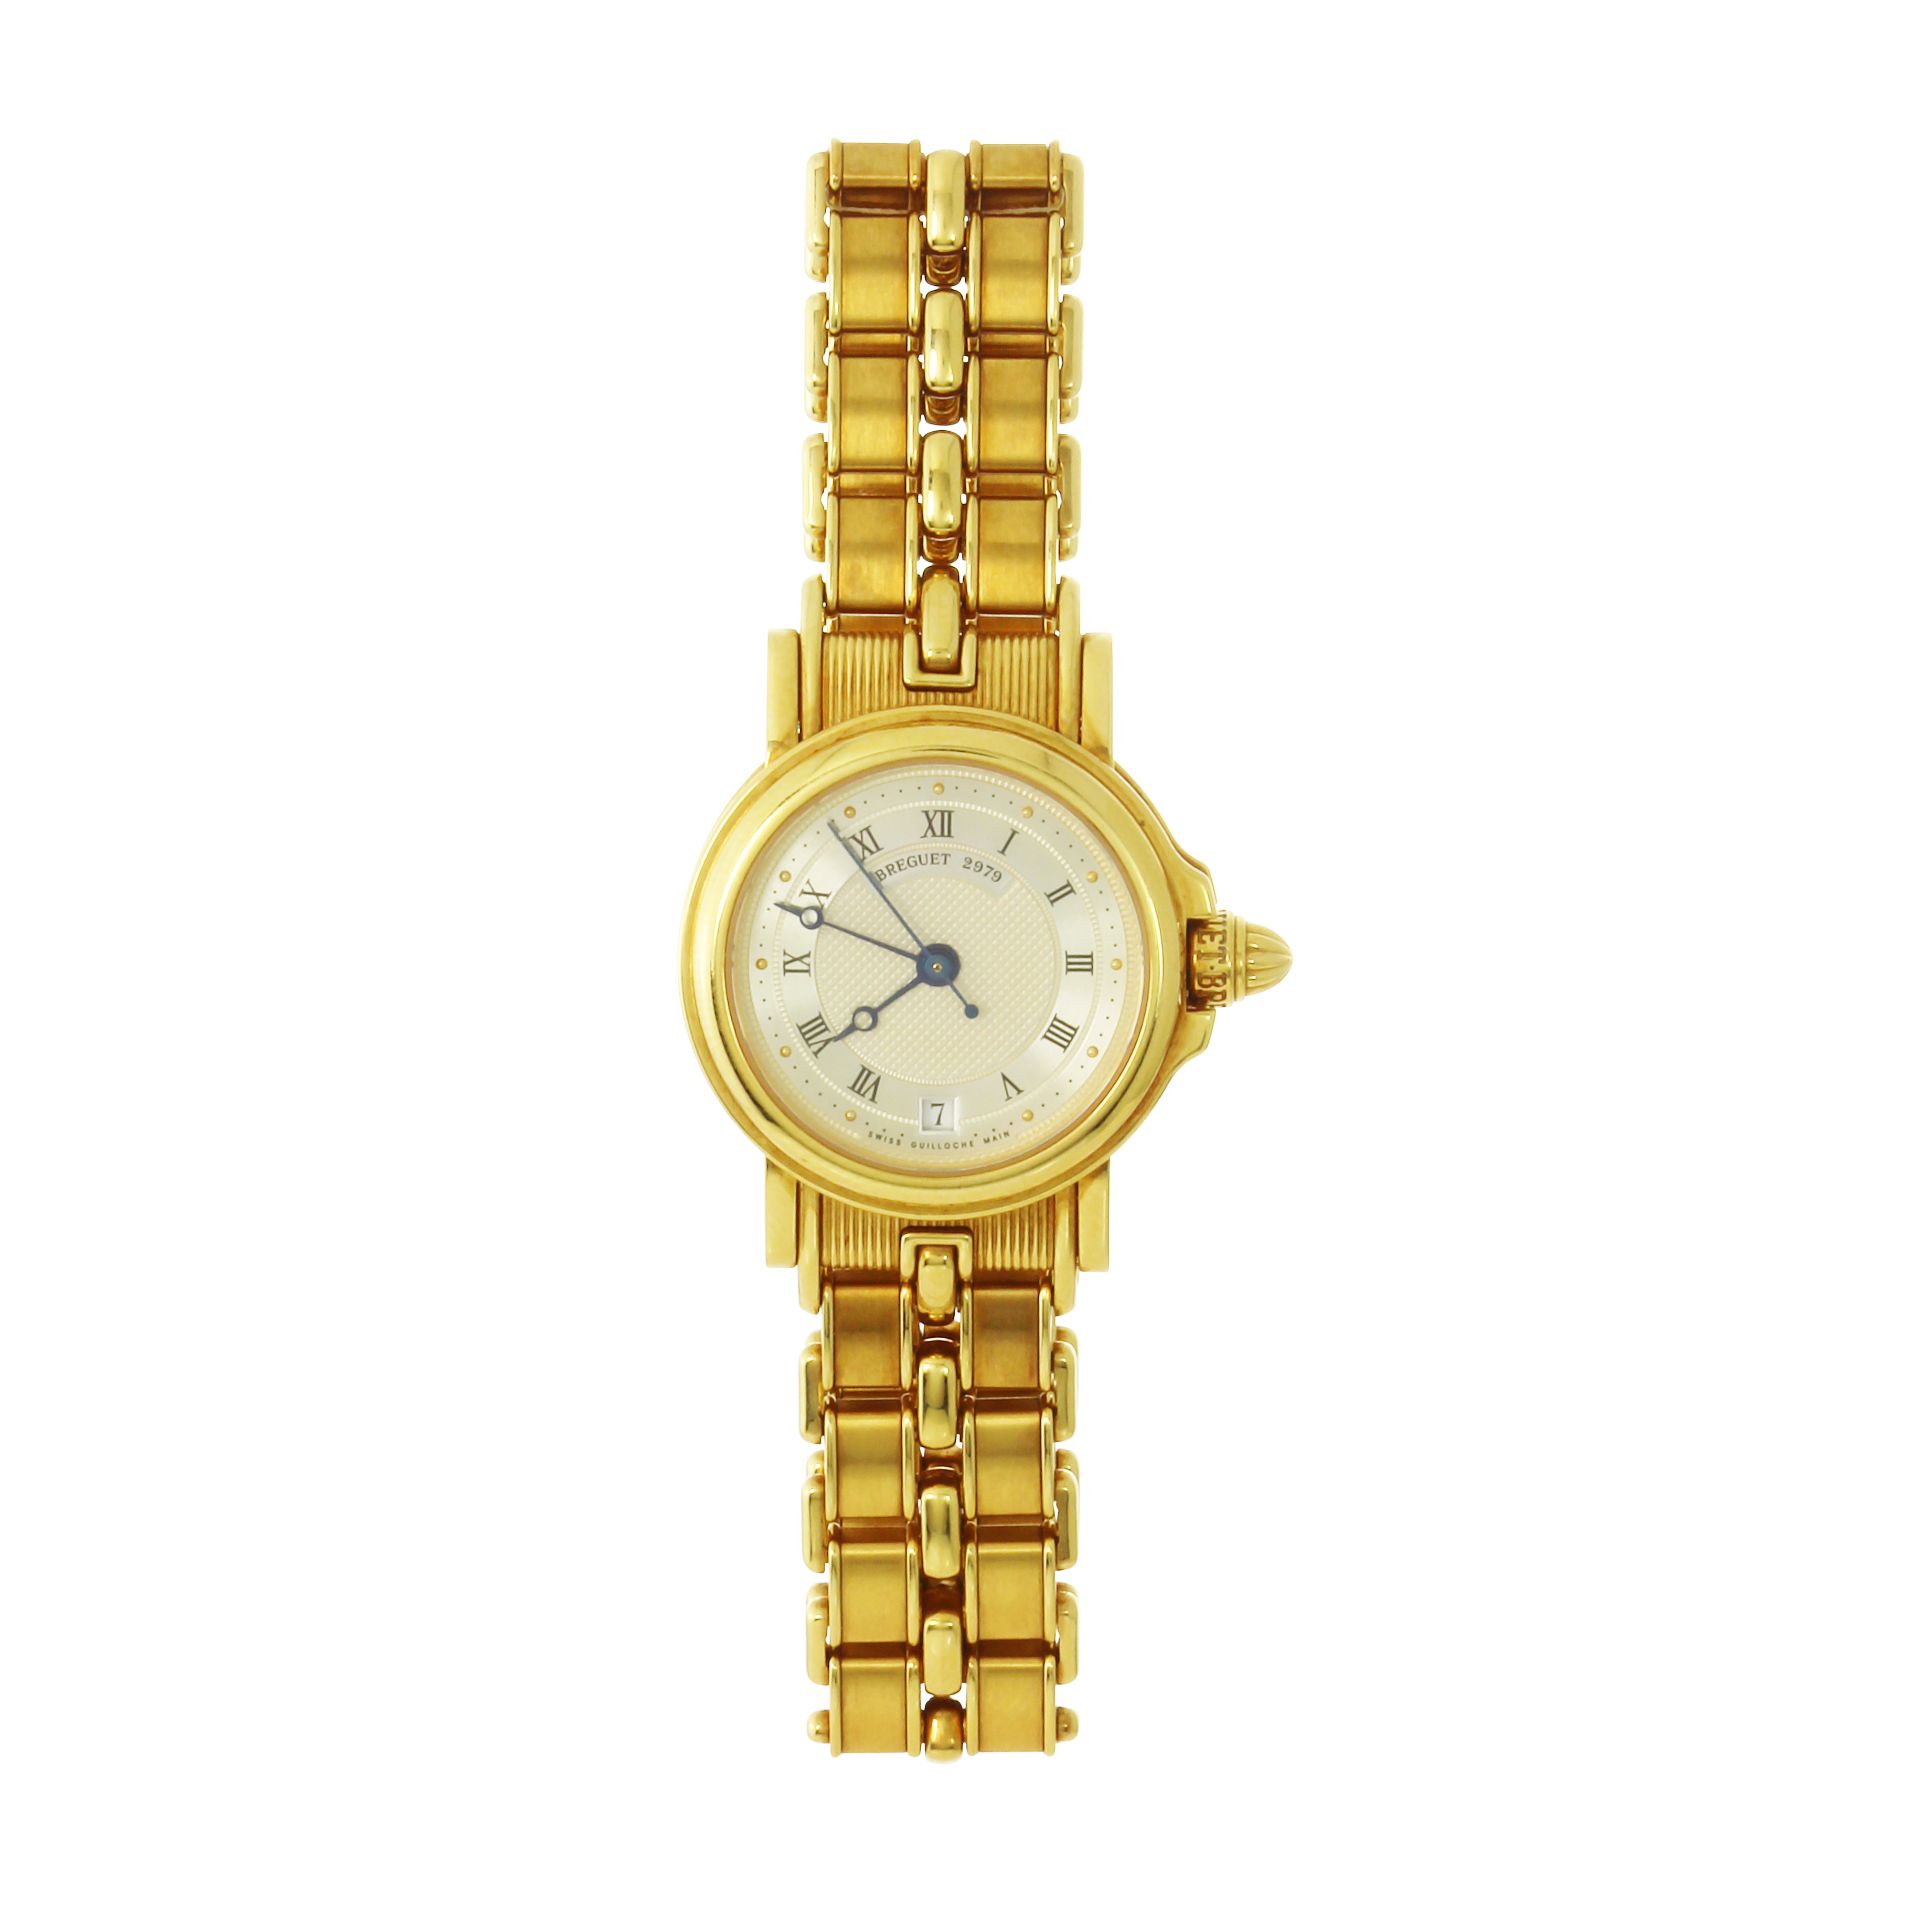 A MARINE 3400 LADIES GOLD WRISTWATCH BREGUET in 18ct yellow gold, the 26mm circular face with